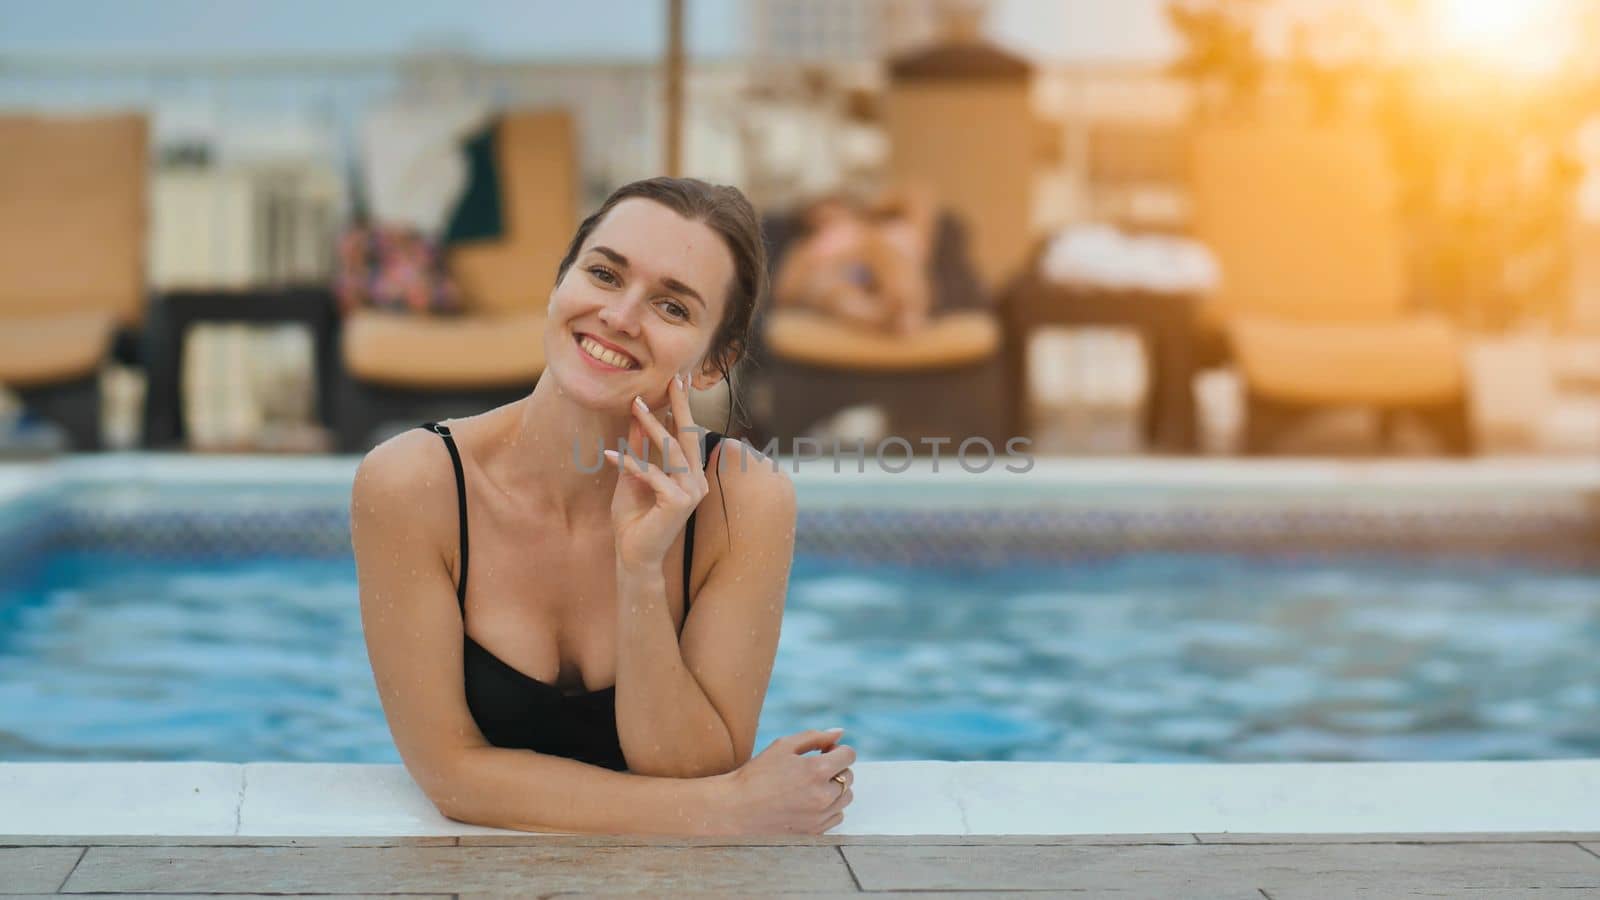 Girl after swimming posing in the pool